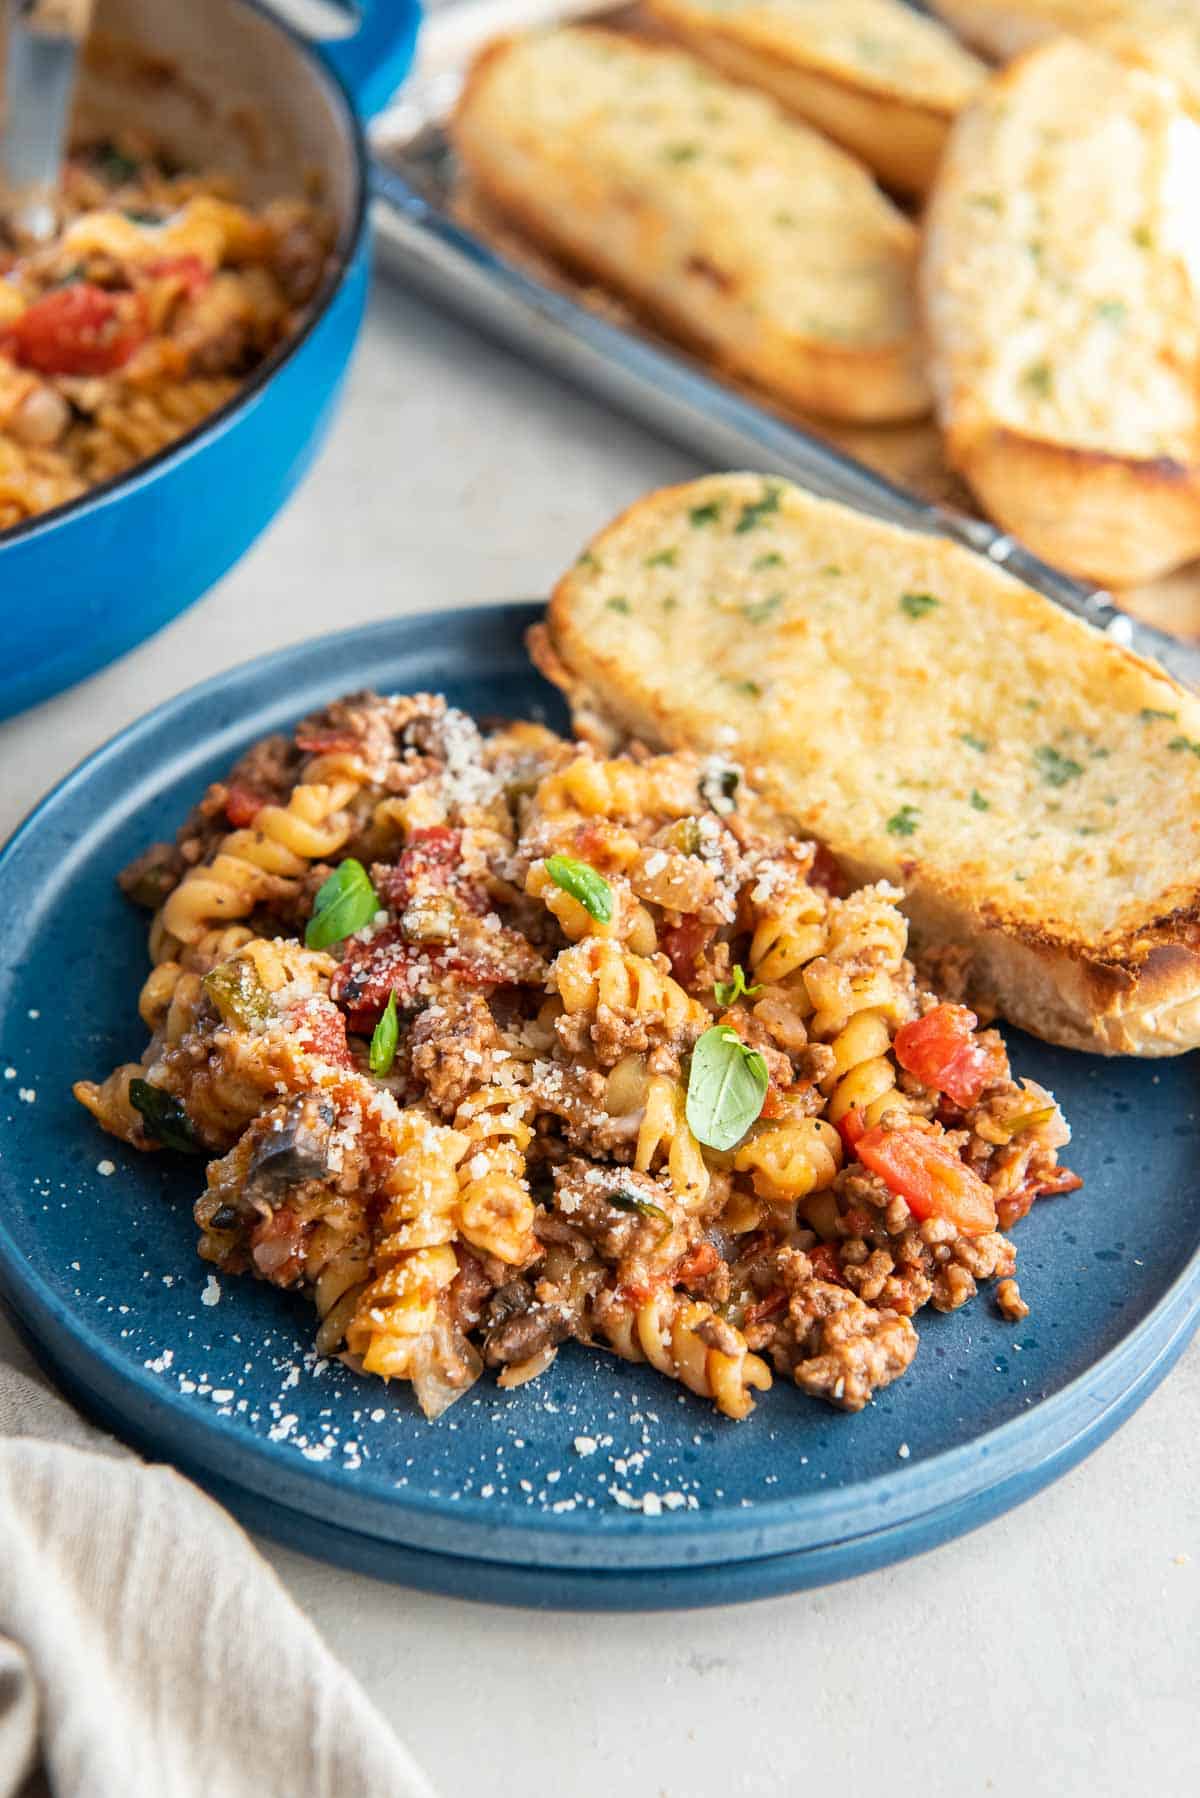 A serving of ground beef pasta on a blue plate with garlic bread.